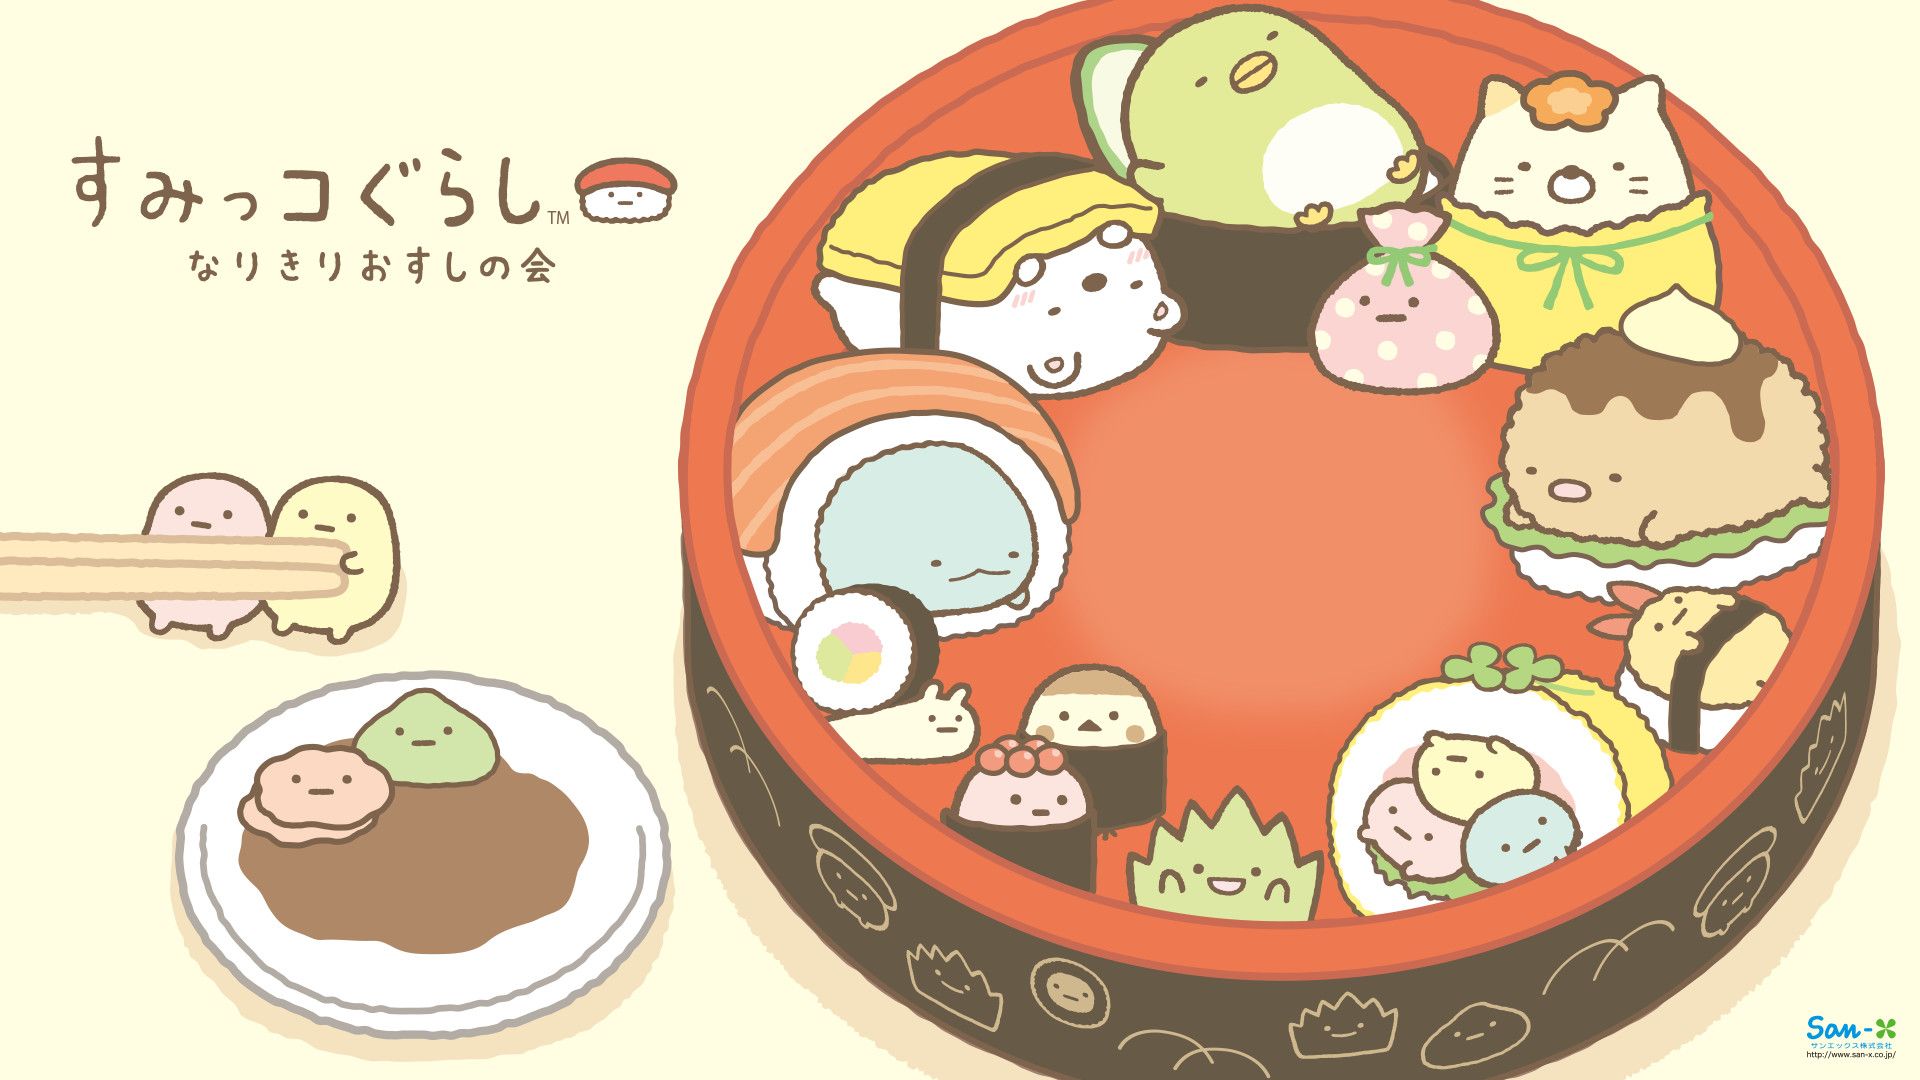 Japanese Cute Foods Wallpaper & Background Beautiful Best Available For Download Japanese Cute Foods Photo Free On Zicxa.com Image